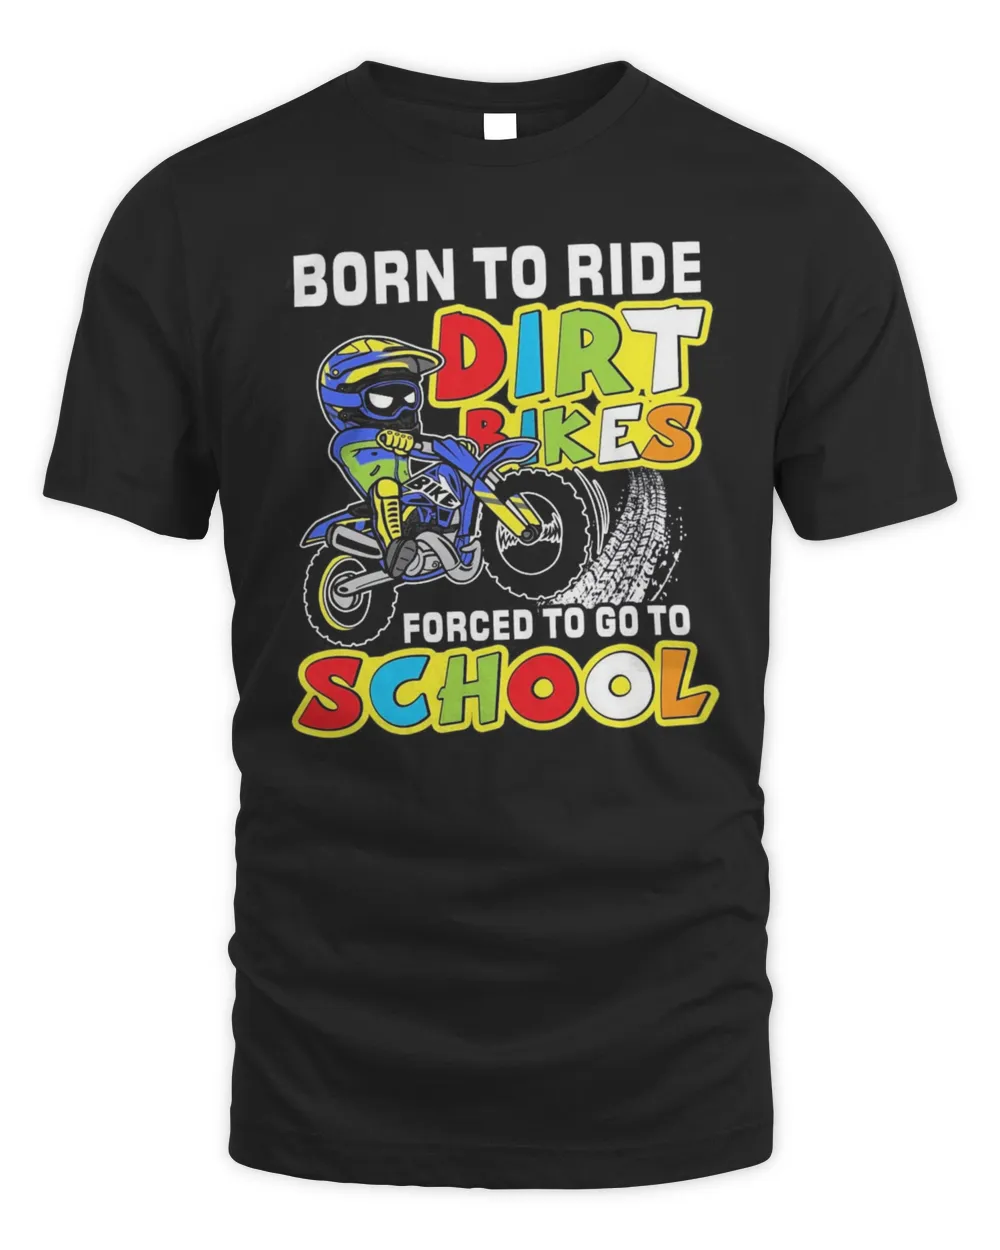 Born To Ride Dirt Bikes Forced To Go To School Shirt